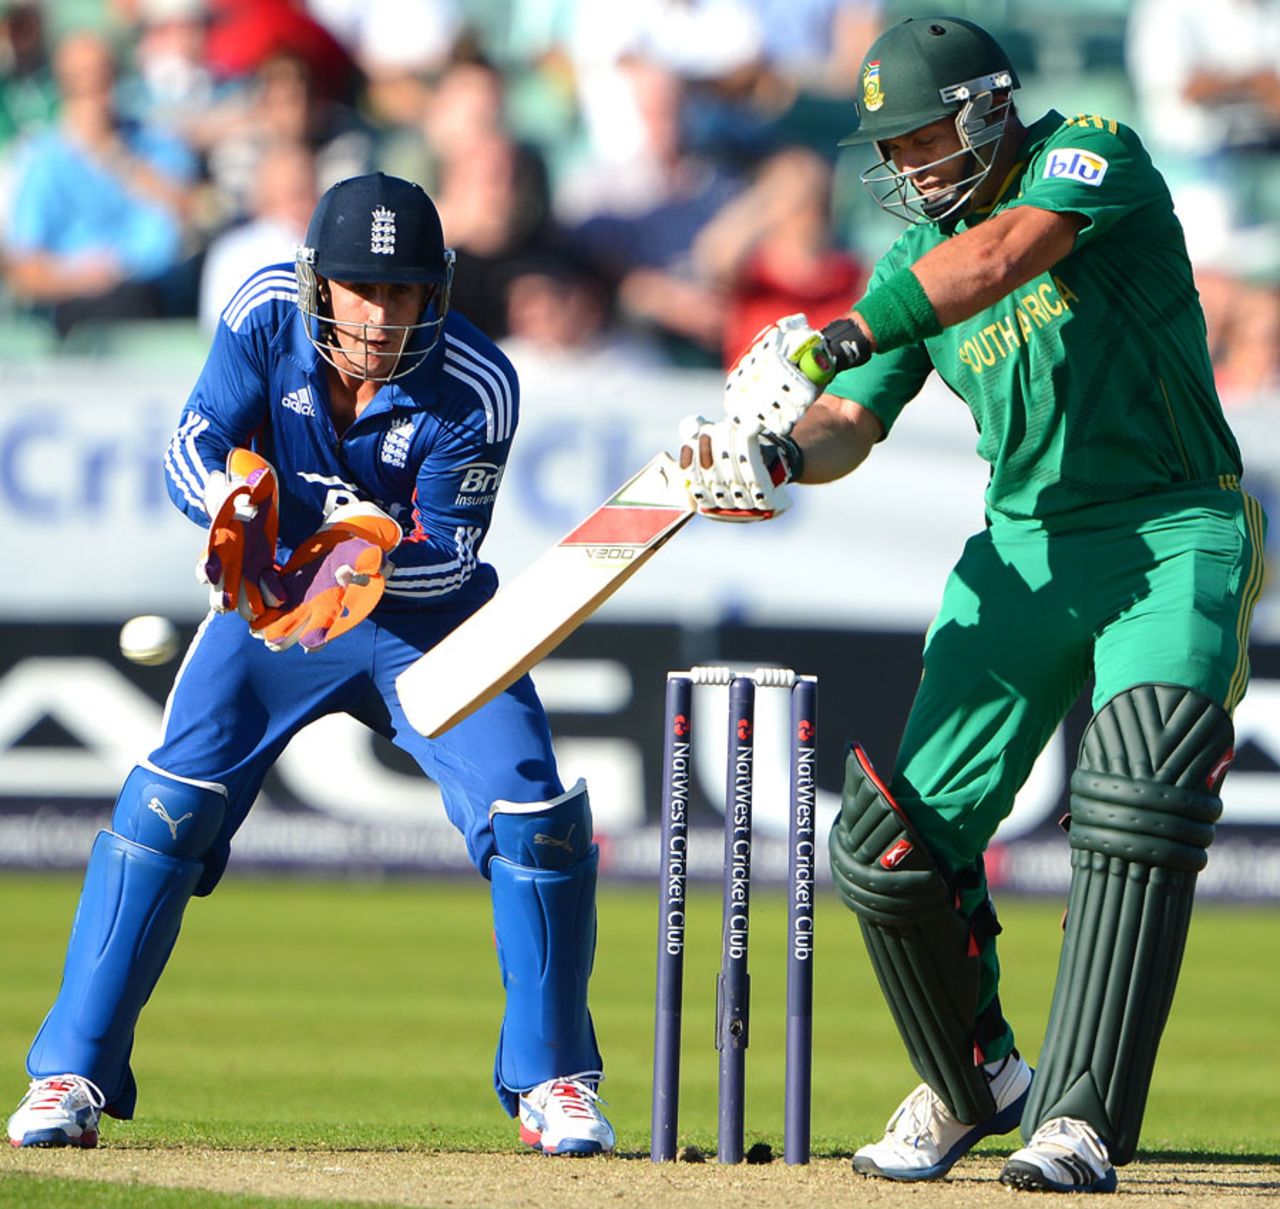 Jacques Kallis played a steady hand in South Africa's chase, 1st NatWest T20I, Chester-le-Street, September 8, 2012